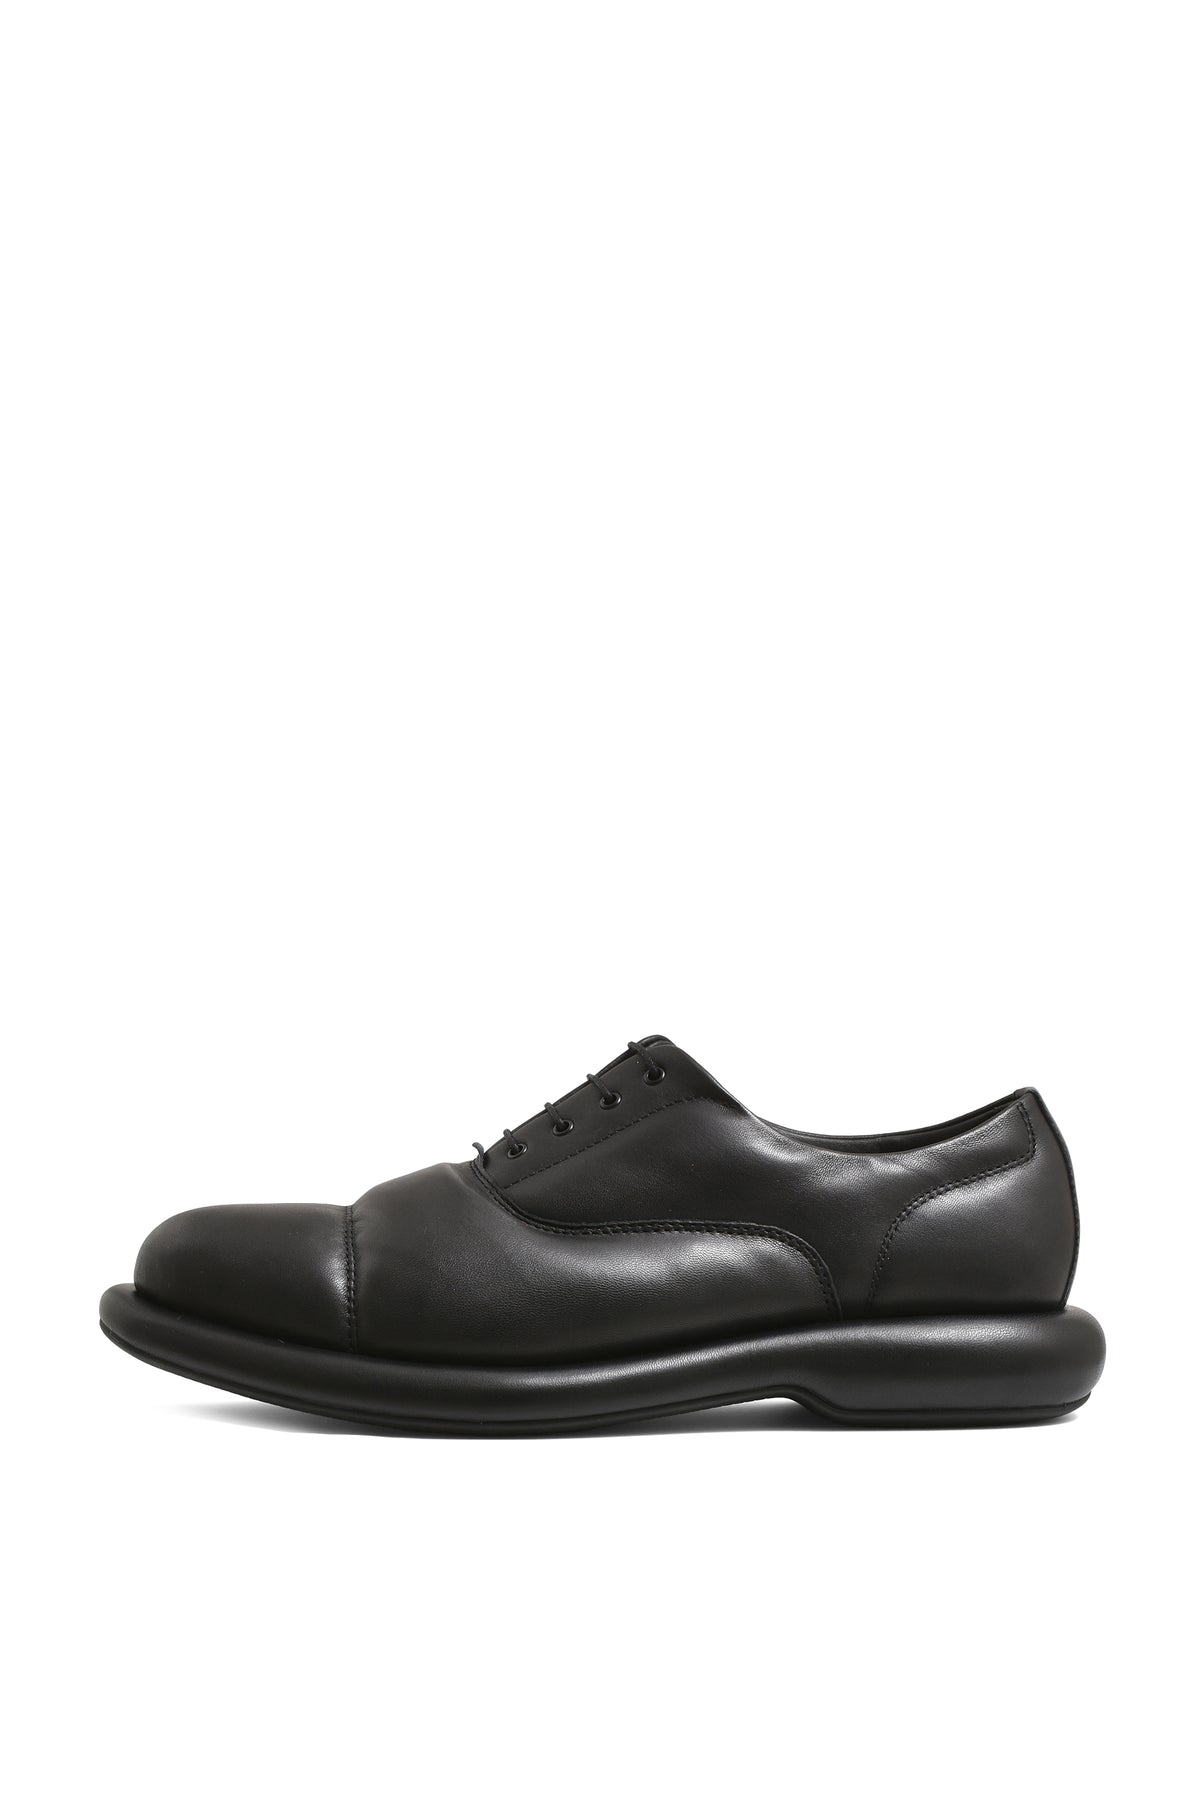 THE OXFORD1 / BLACK LEATHER